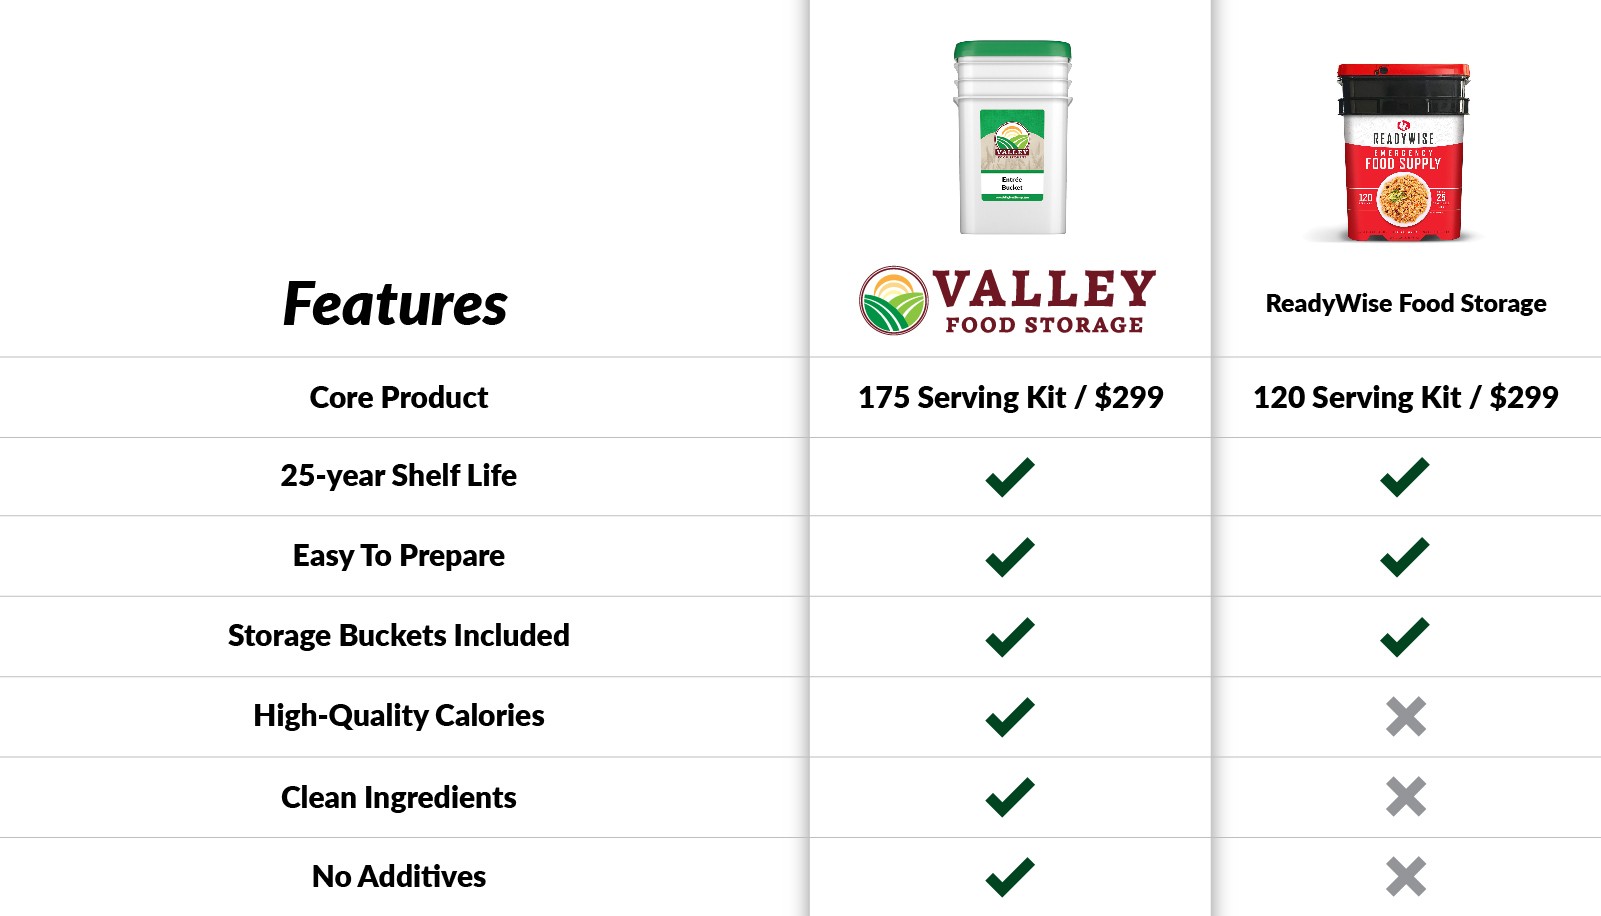 Chart comparing the features between Valley Food Storage products and Readywise Food Storage